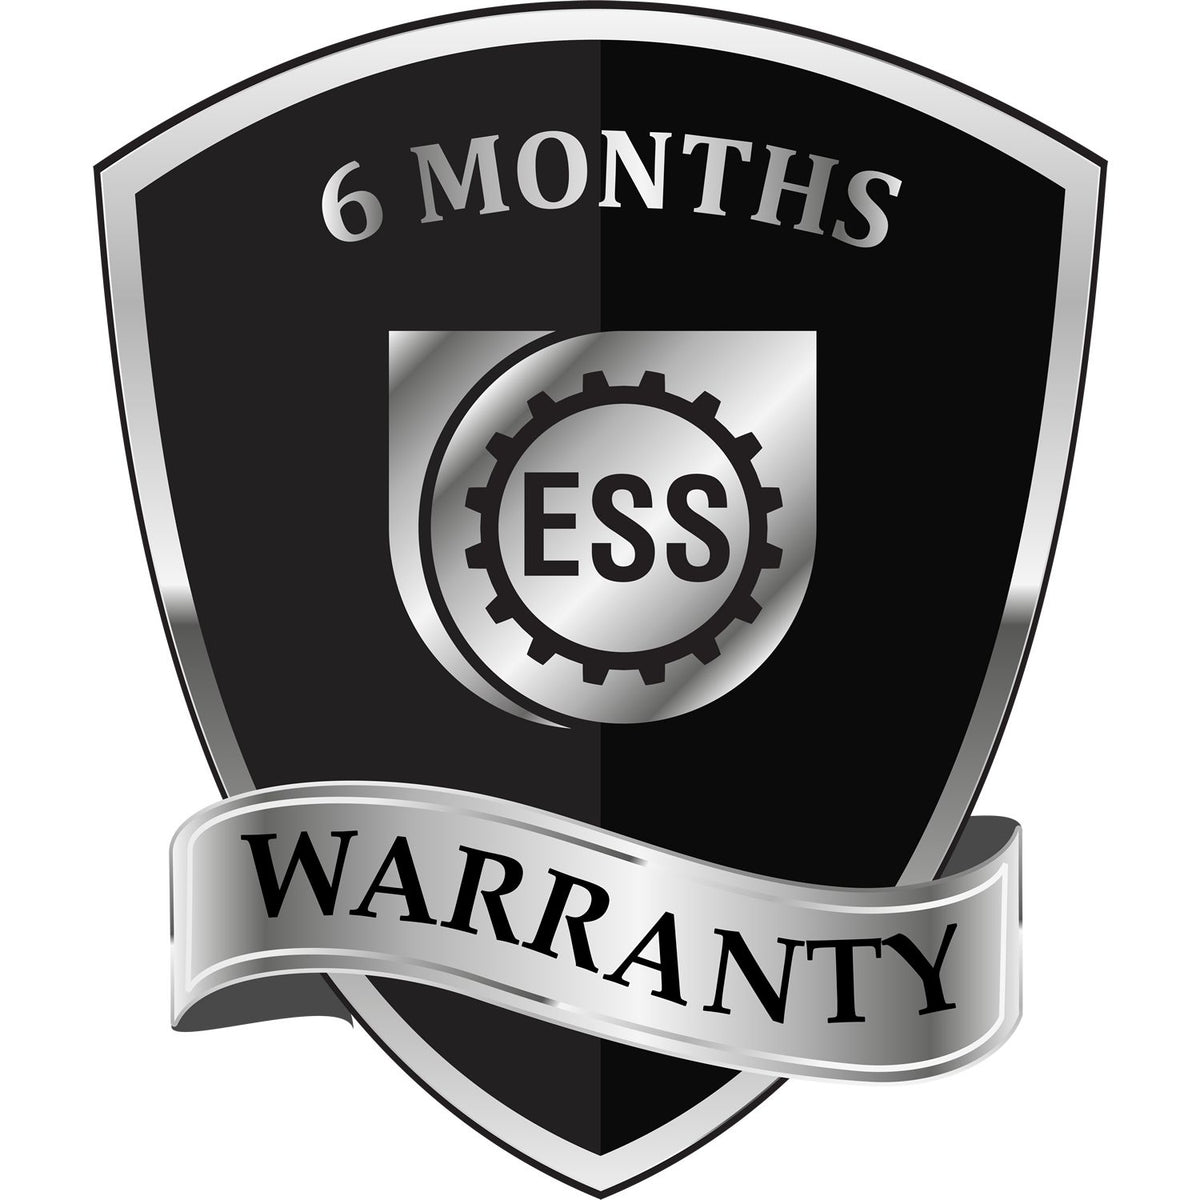 A badge or emblem showing a warranty icon for the Self-Inking Rectangular Georgia Notary Stamp